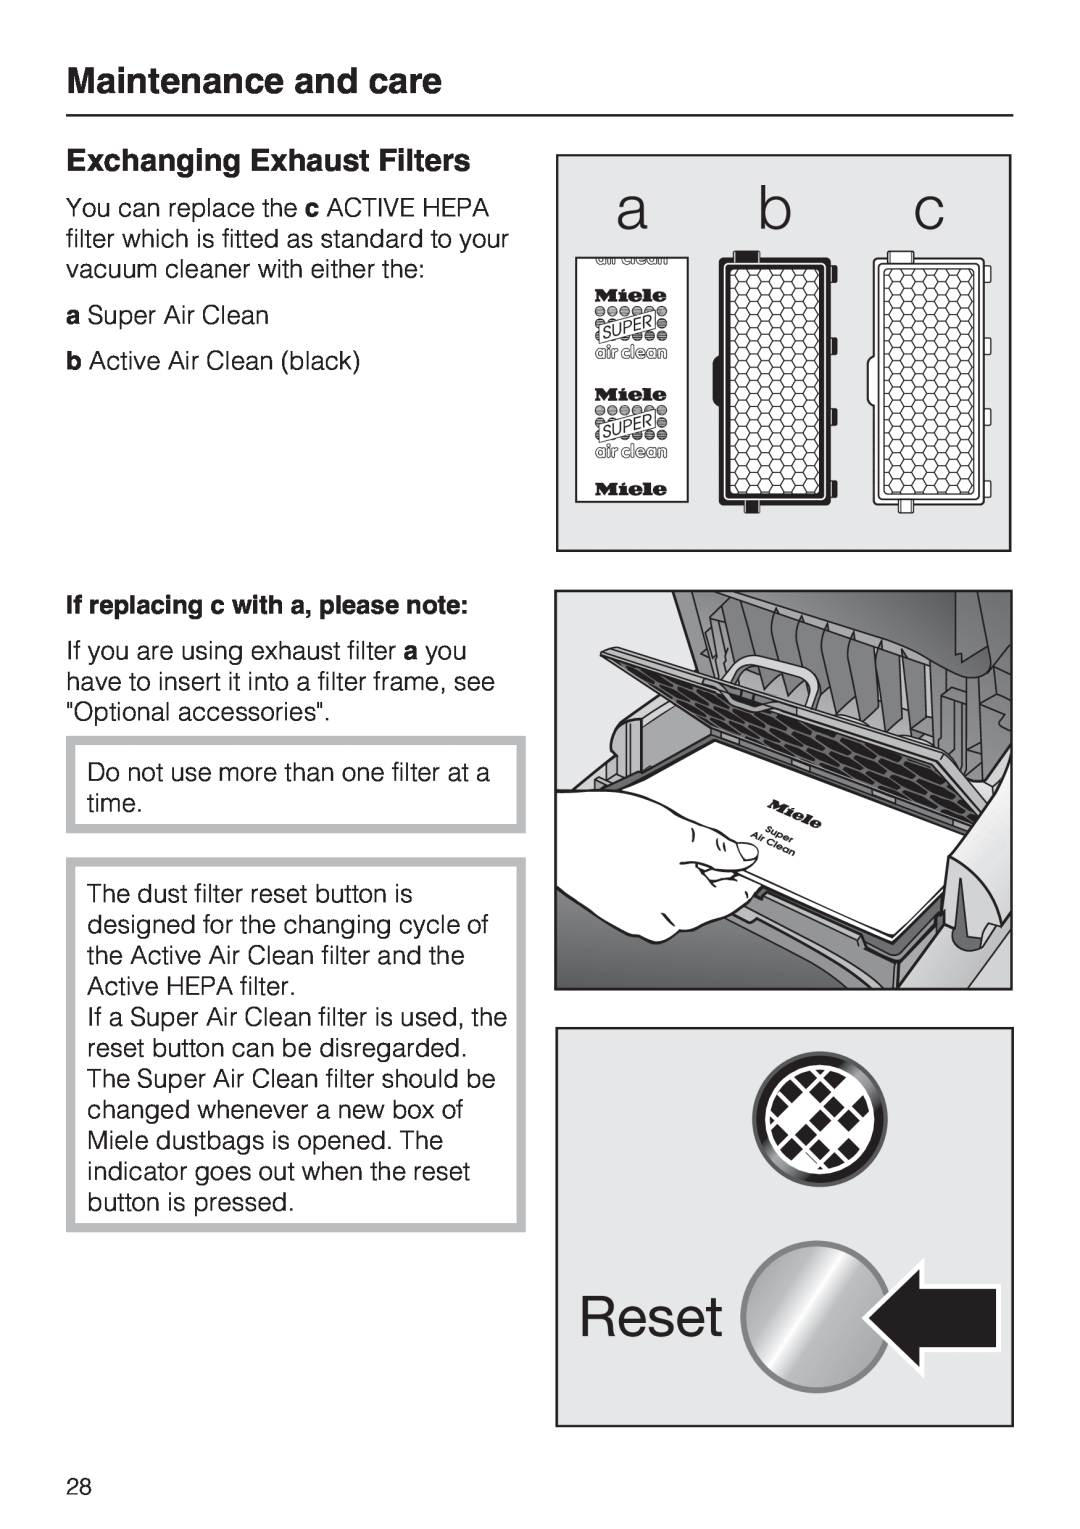 Miele S 5980 operating instructions Exchanging Exhaust Filters, Maintenance and care, If replacing c with a, please note 